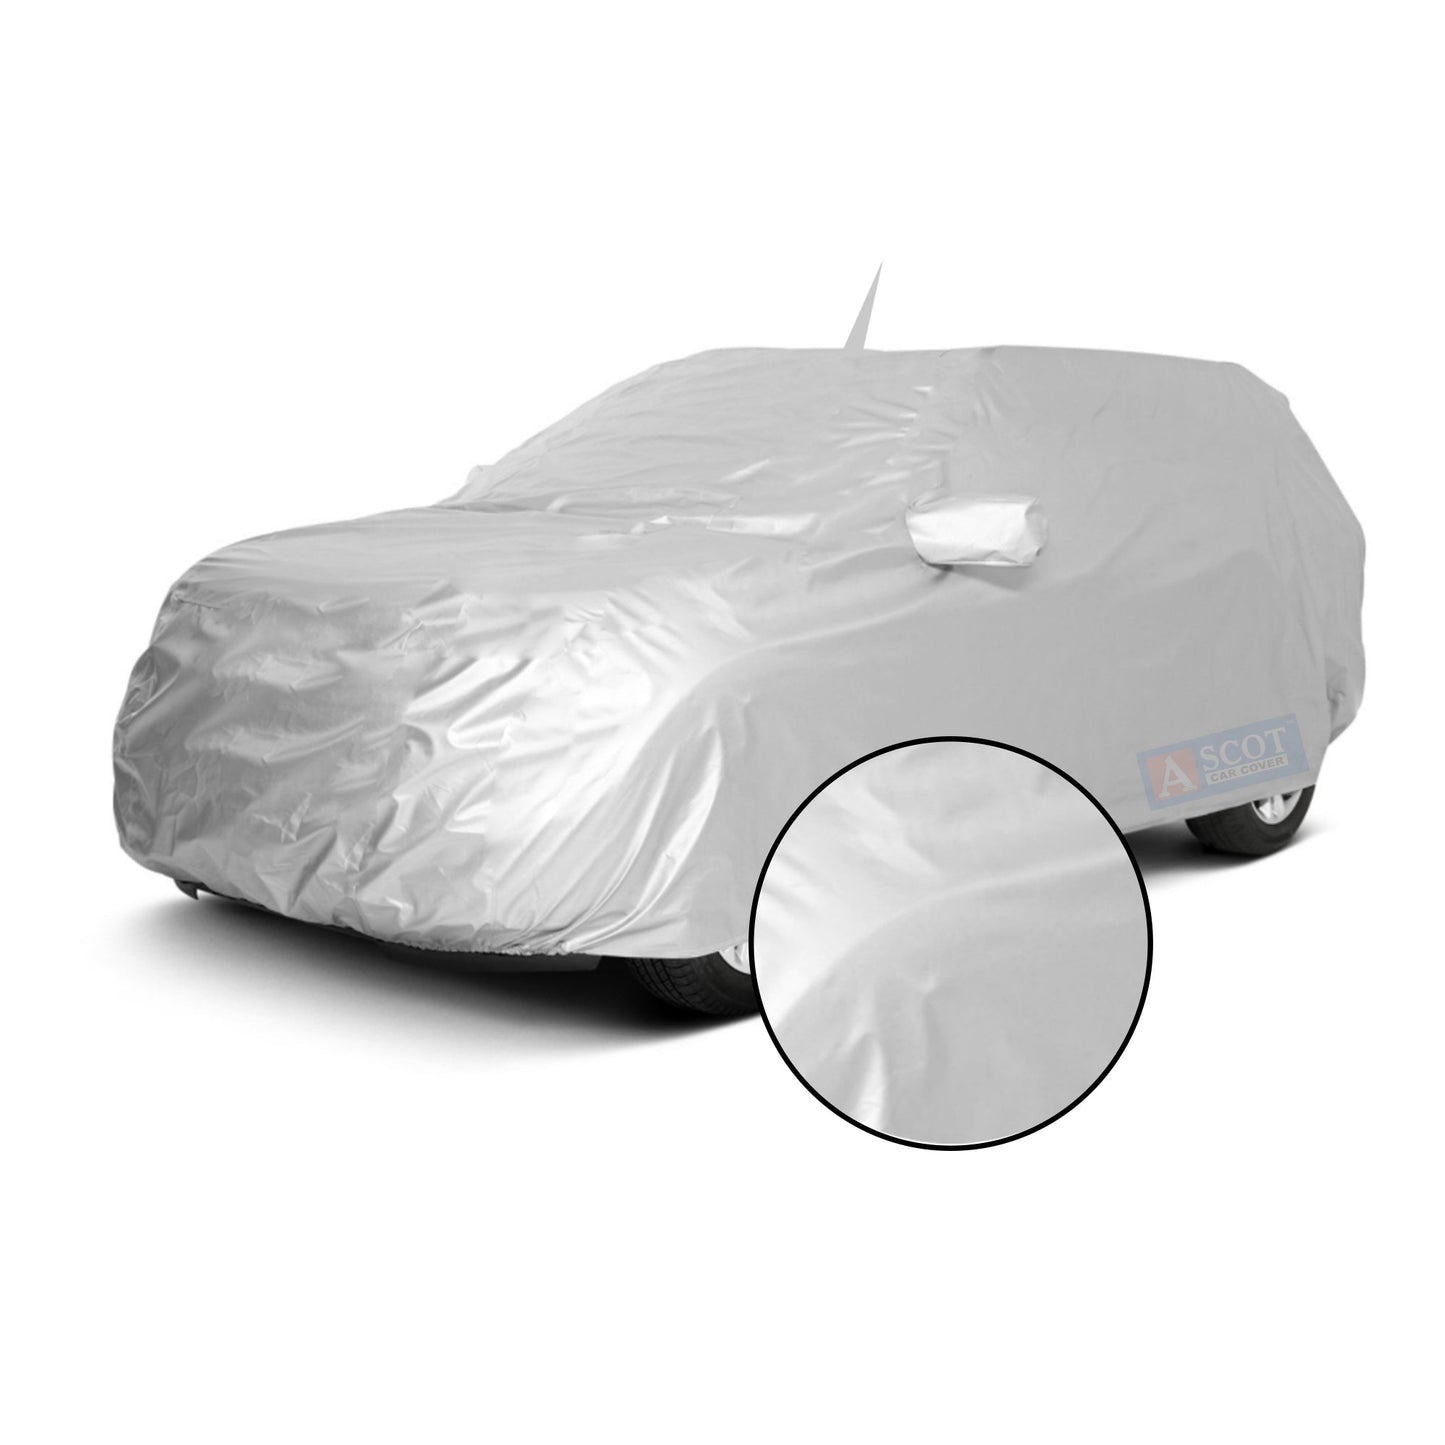 Ascot Tata Altroz Car Body Cover With Mirror And Front Antenna Pockets Dust Proof, Trippel Stitched